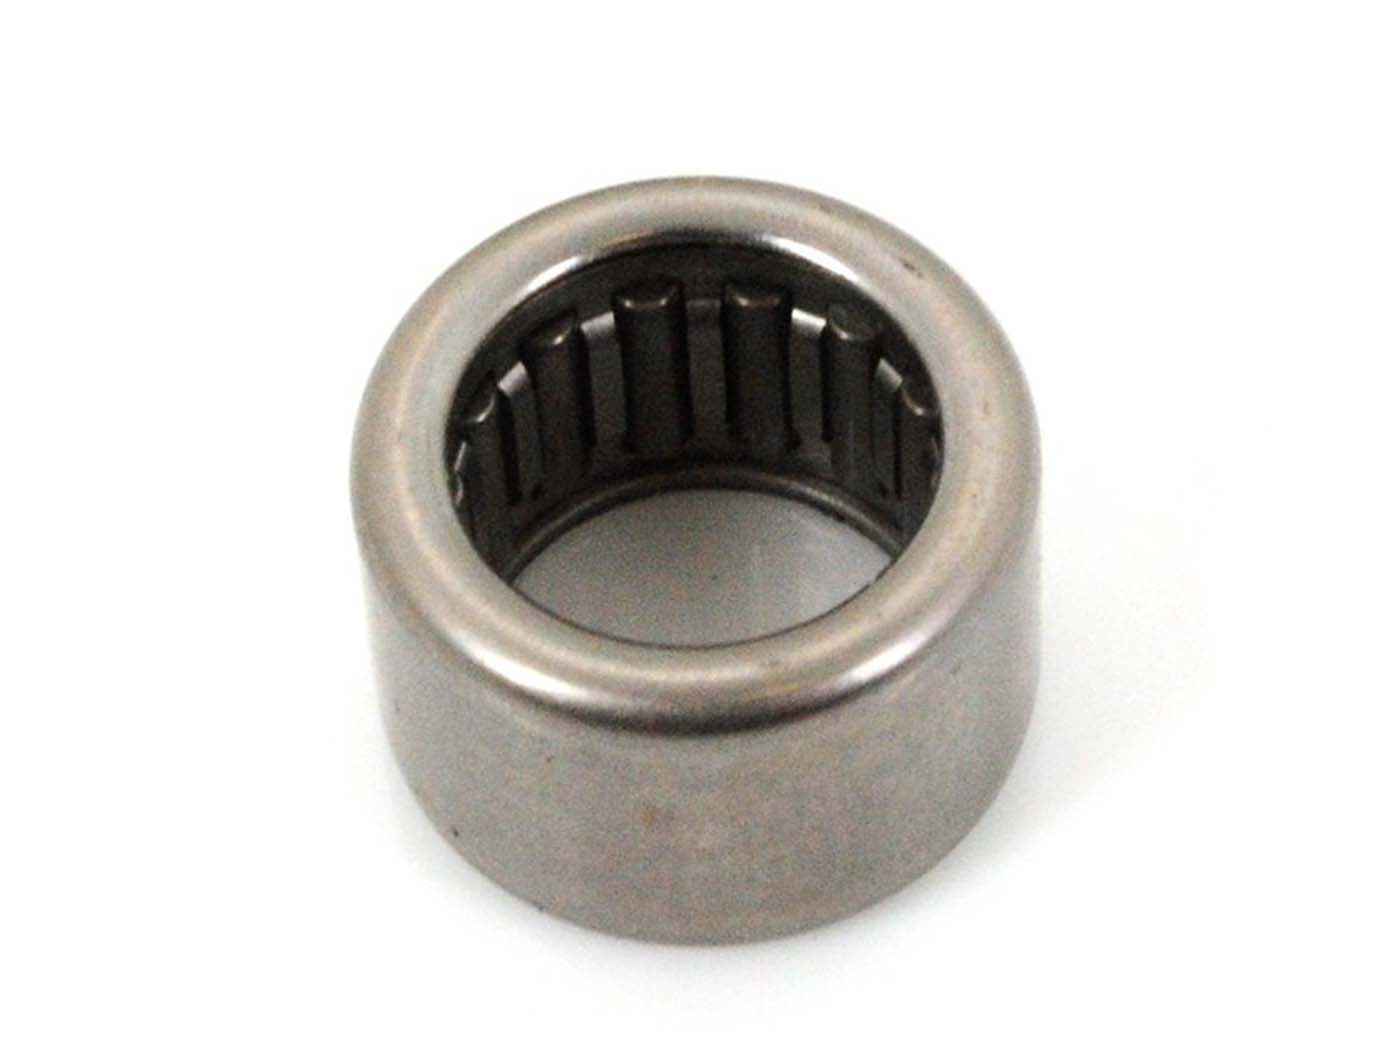 Connecting Rod Bearing On Top Of Piston For Velo Solex Moped